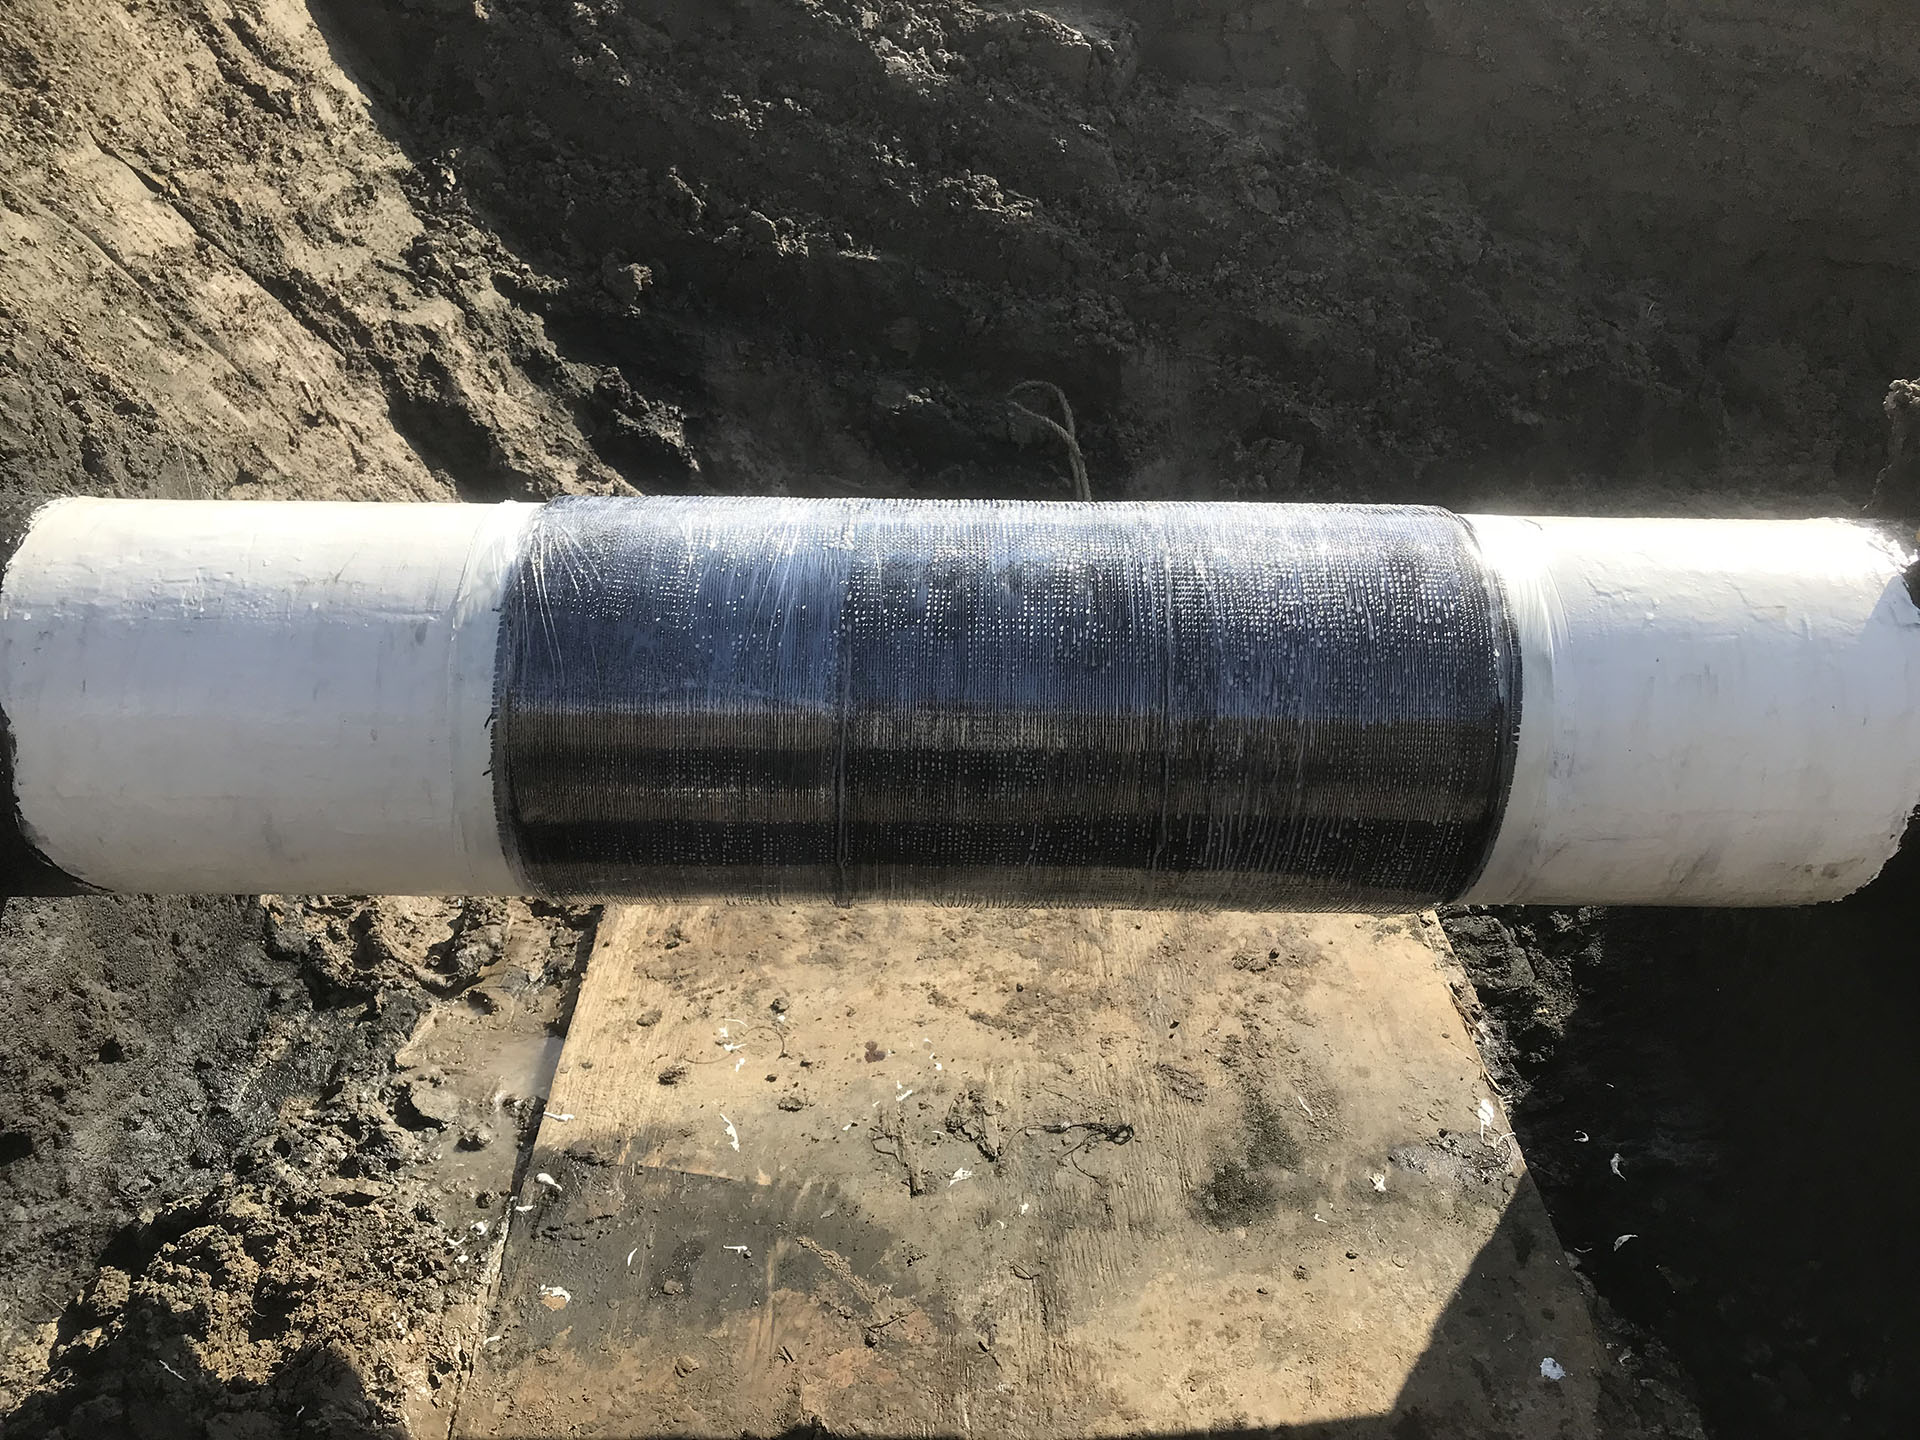 The team installed 24 layers of composite cloth over a 3-ft (1-m) section of pipeline, then covered the repair area with constrictor wrap and perforated it to allow the composite to cure.